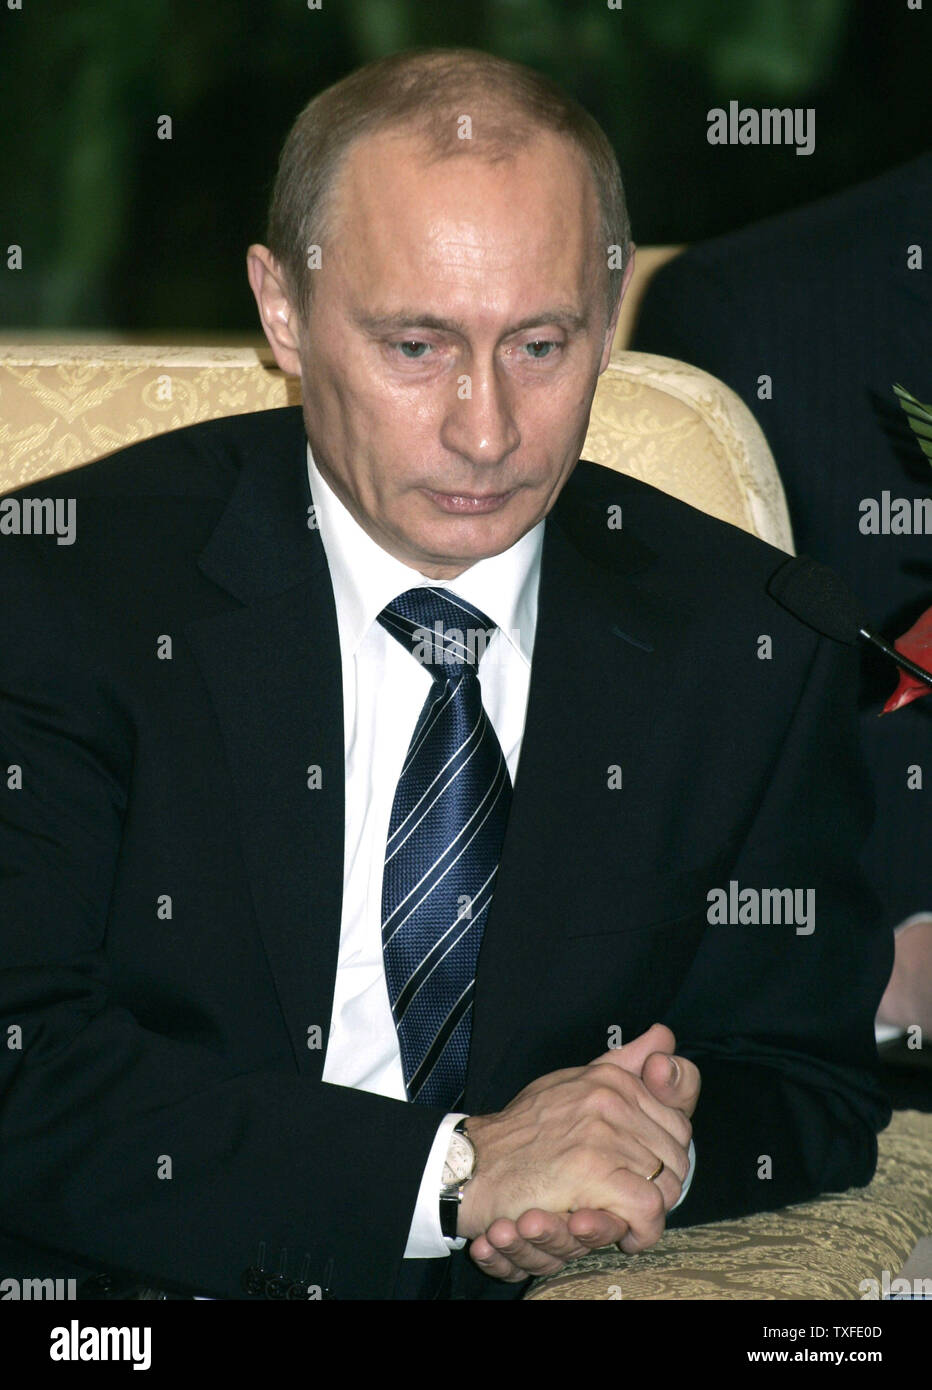 Russian President Vladimir Putin attends a meeting with Chinese Premier Wen Jiabao in Beijing, March 22, 2006. During Putin's state visit to China, two countries agreed to build two major gas pipelines and broaden their links in other energy sectors.(UPI Photo/Anatoli Zhdanov) Stock Photo